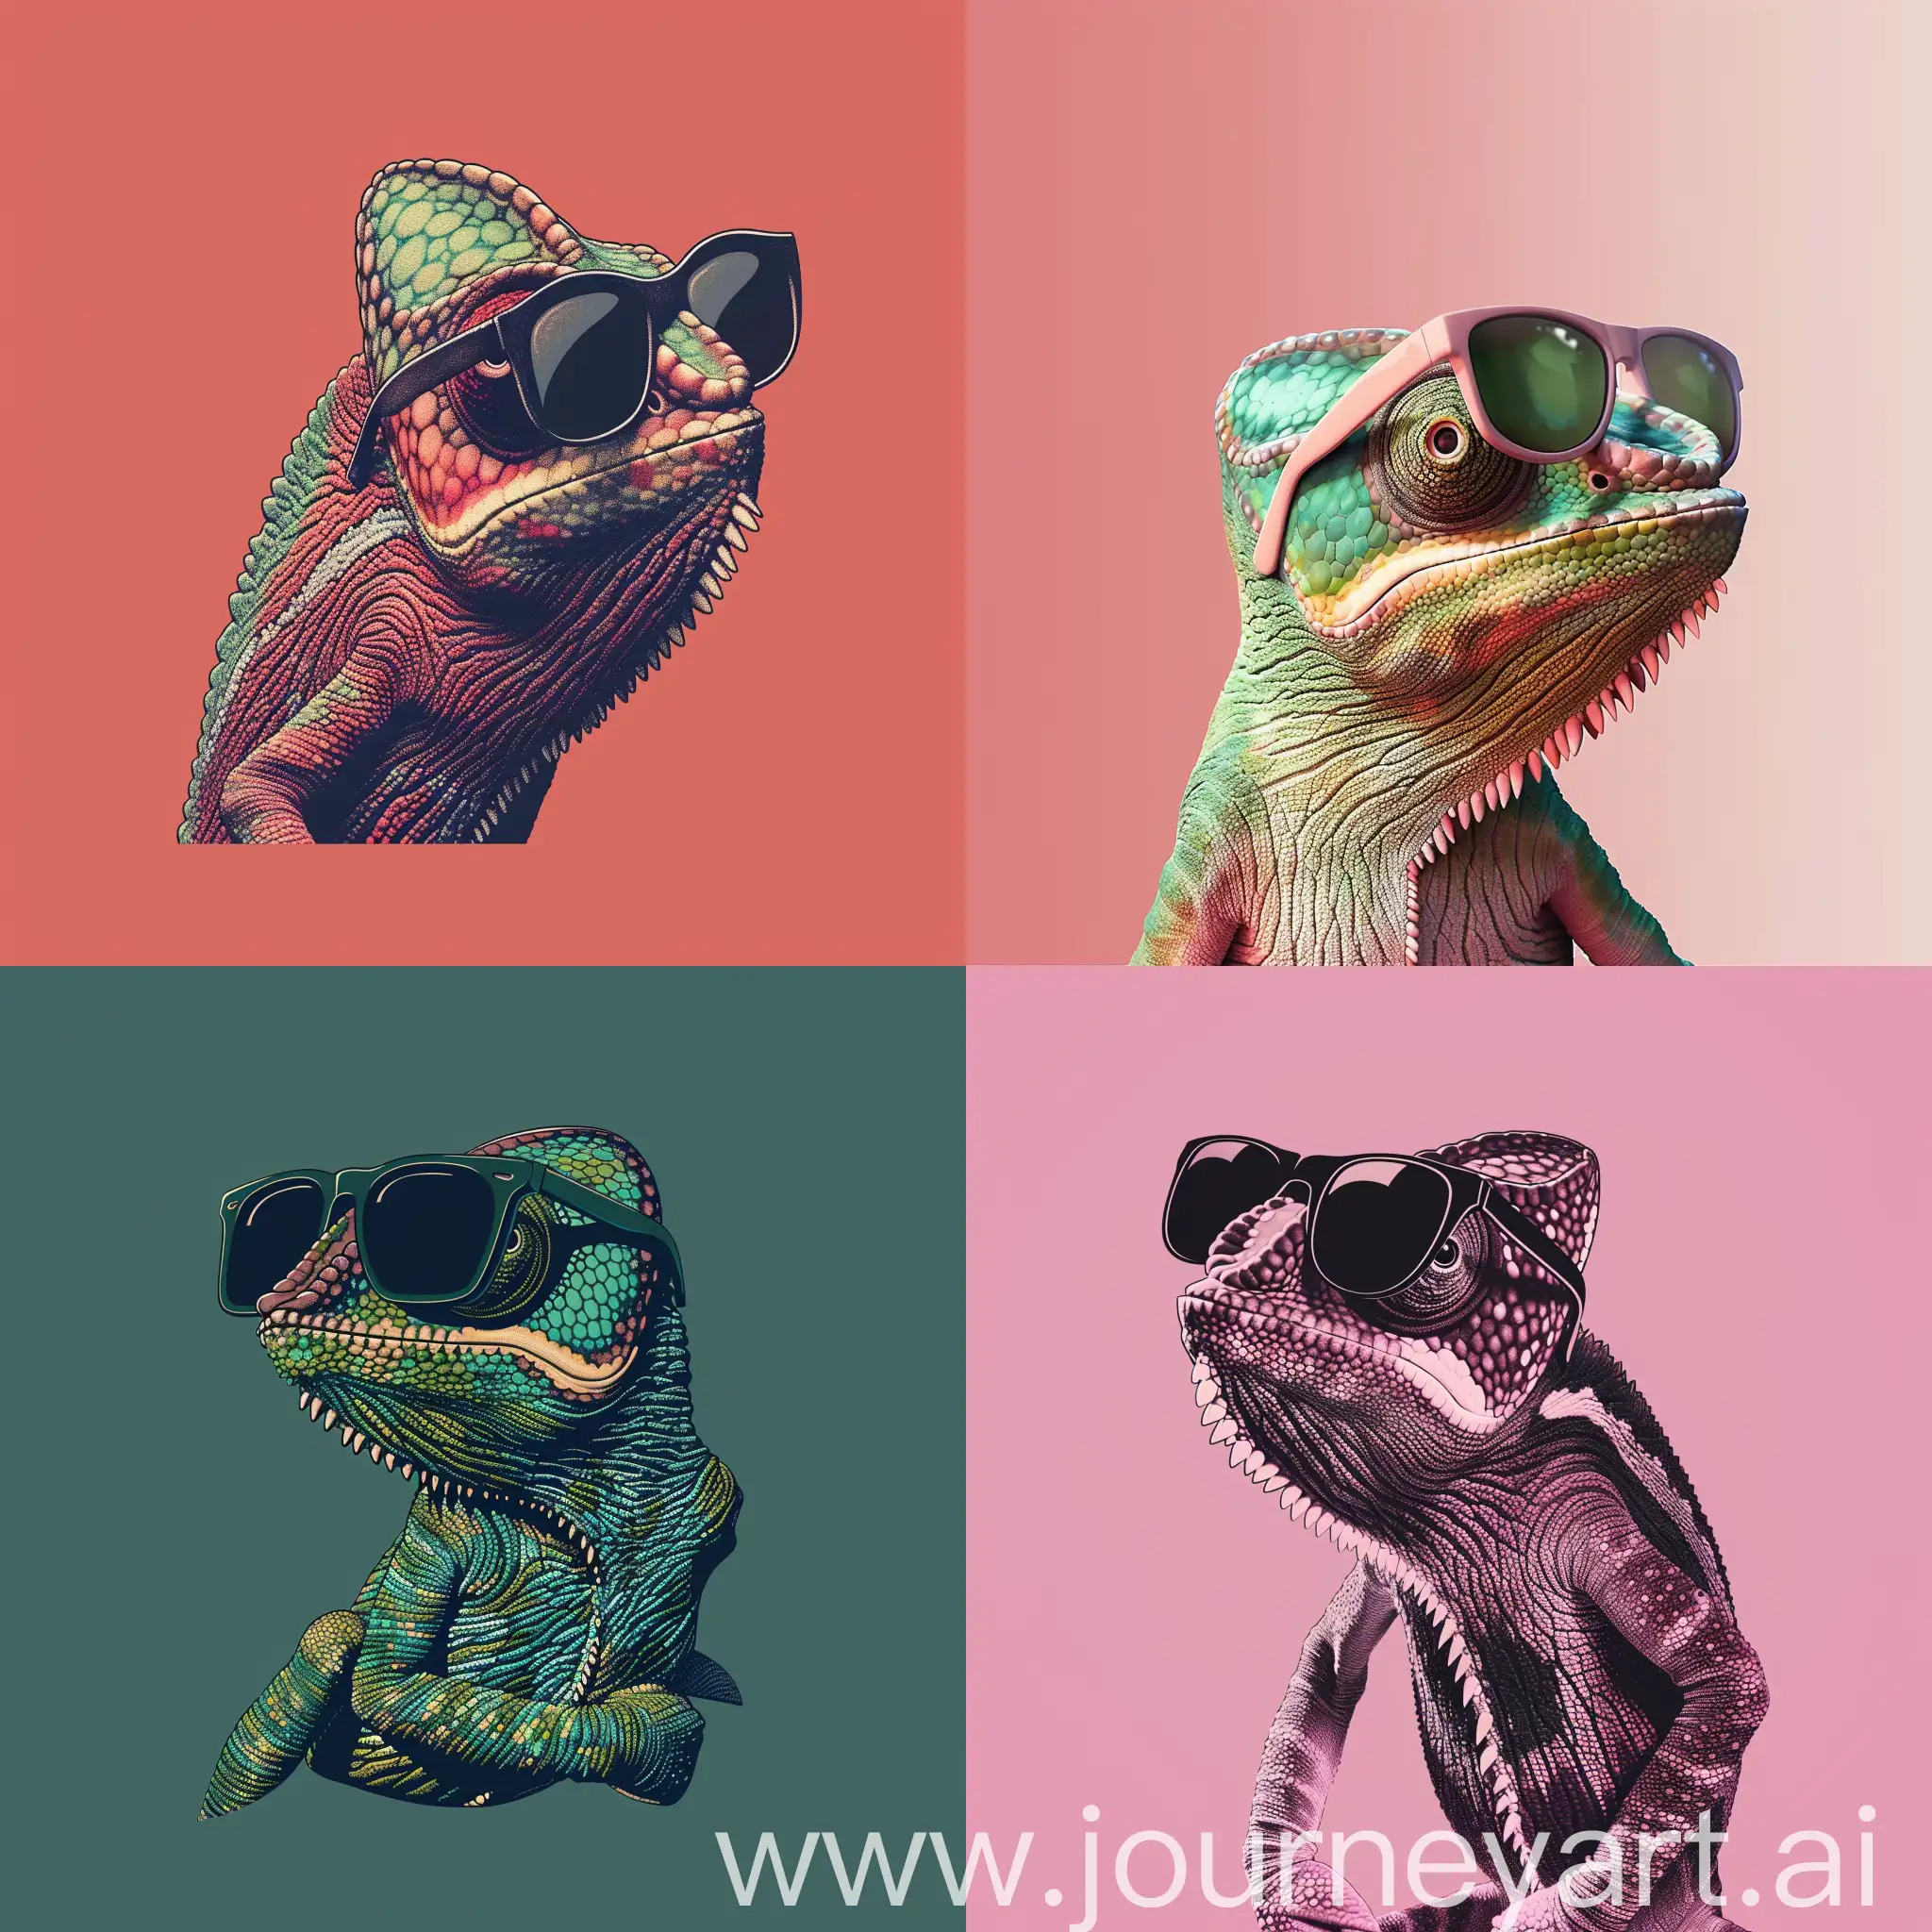 Stylish-Chameleon-in-Sunglasses-Abstract-Vector-Art-on-Solid-Color-Background